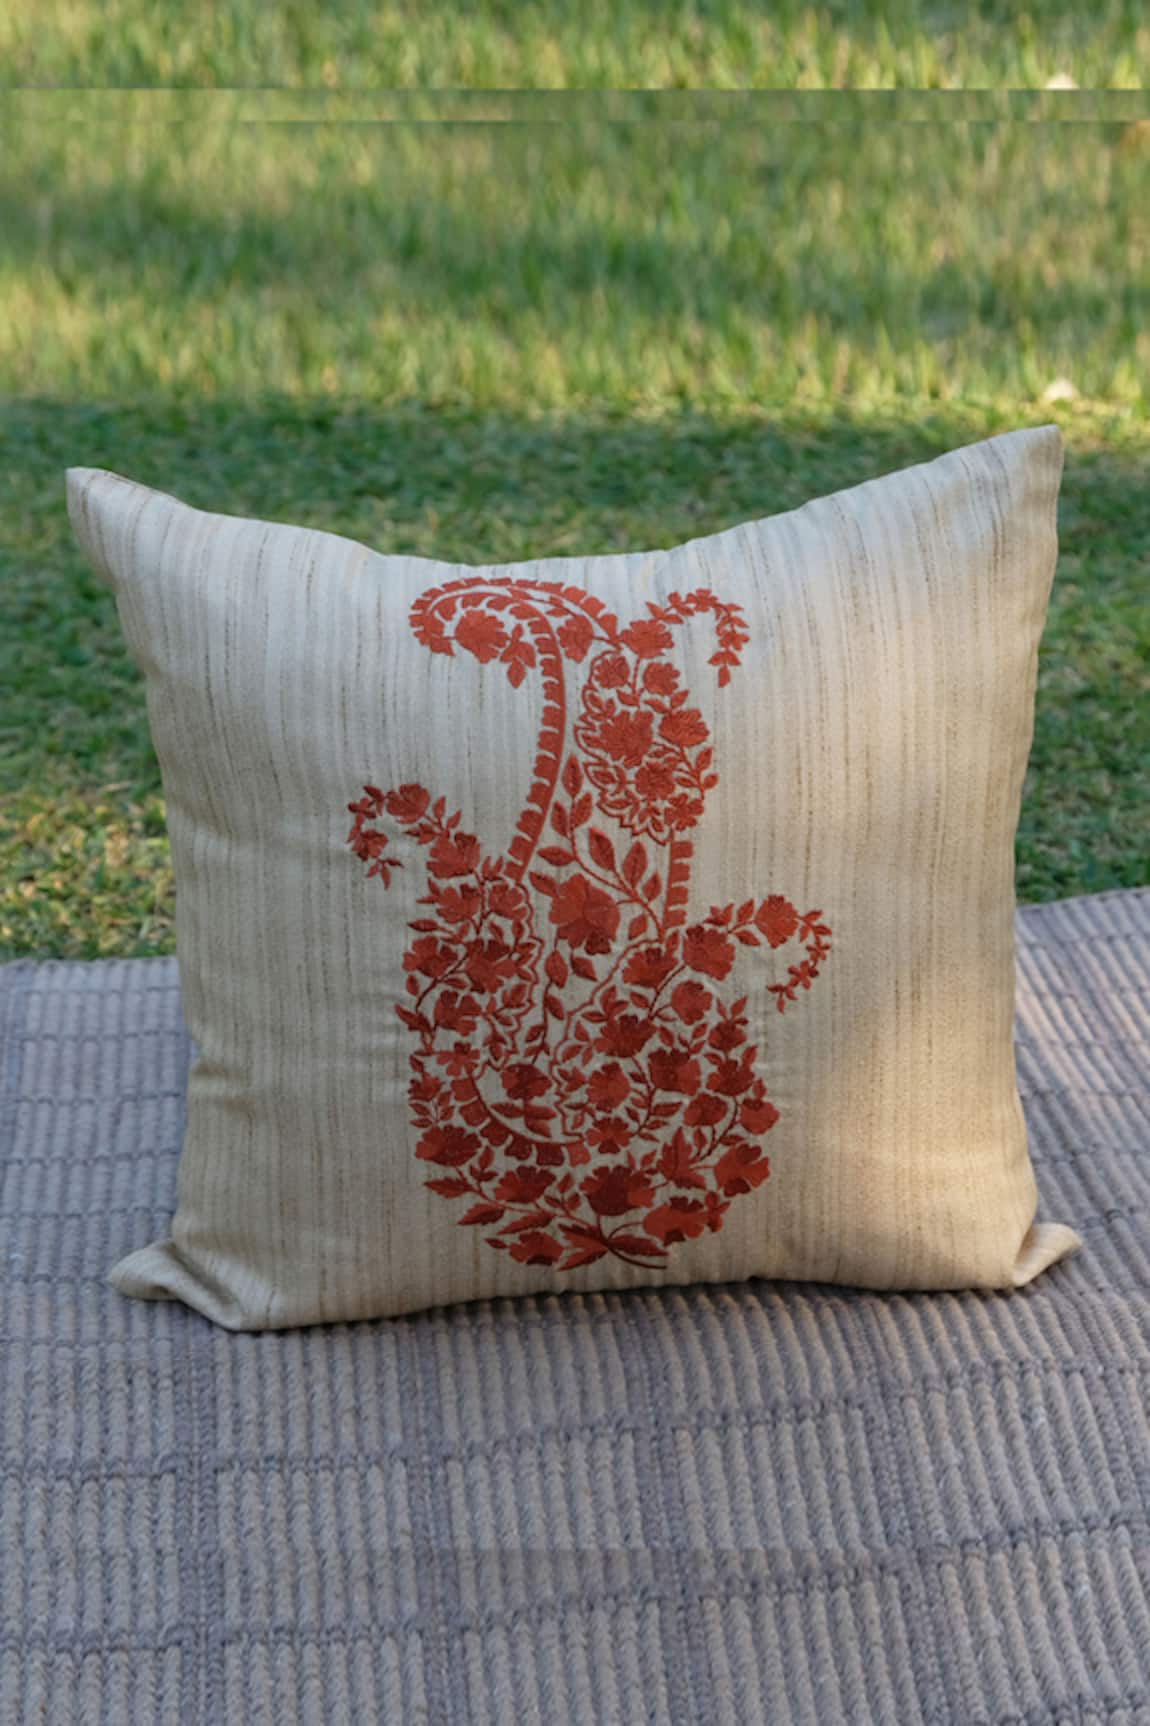 Design Gaatha Paisley Floral Embroidered Cushion Cover